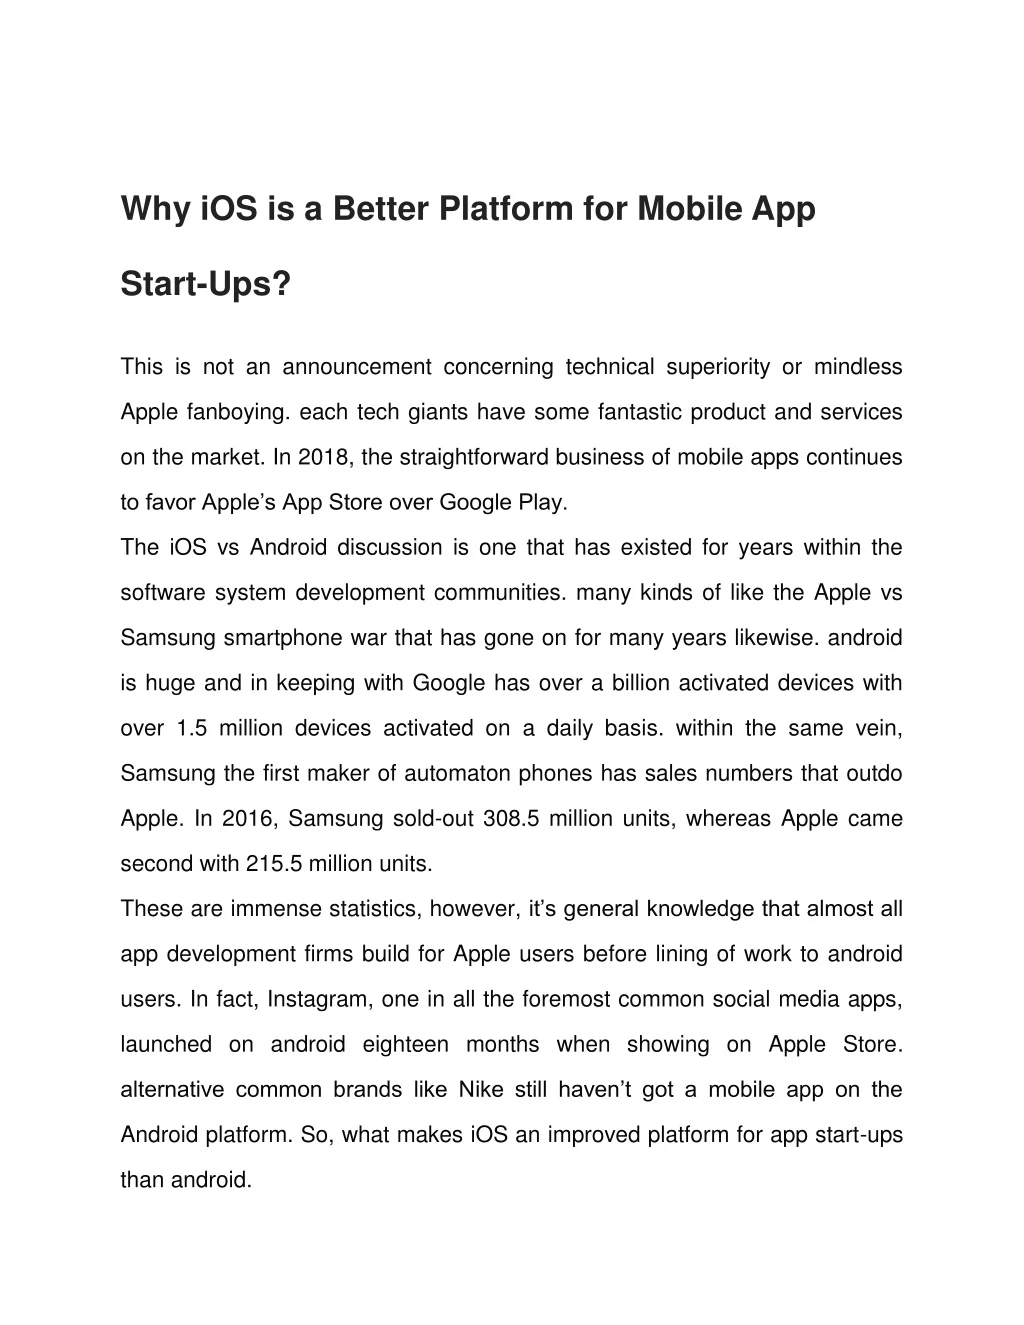 why ios is a better platform for mobile app